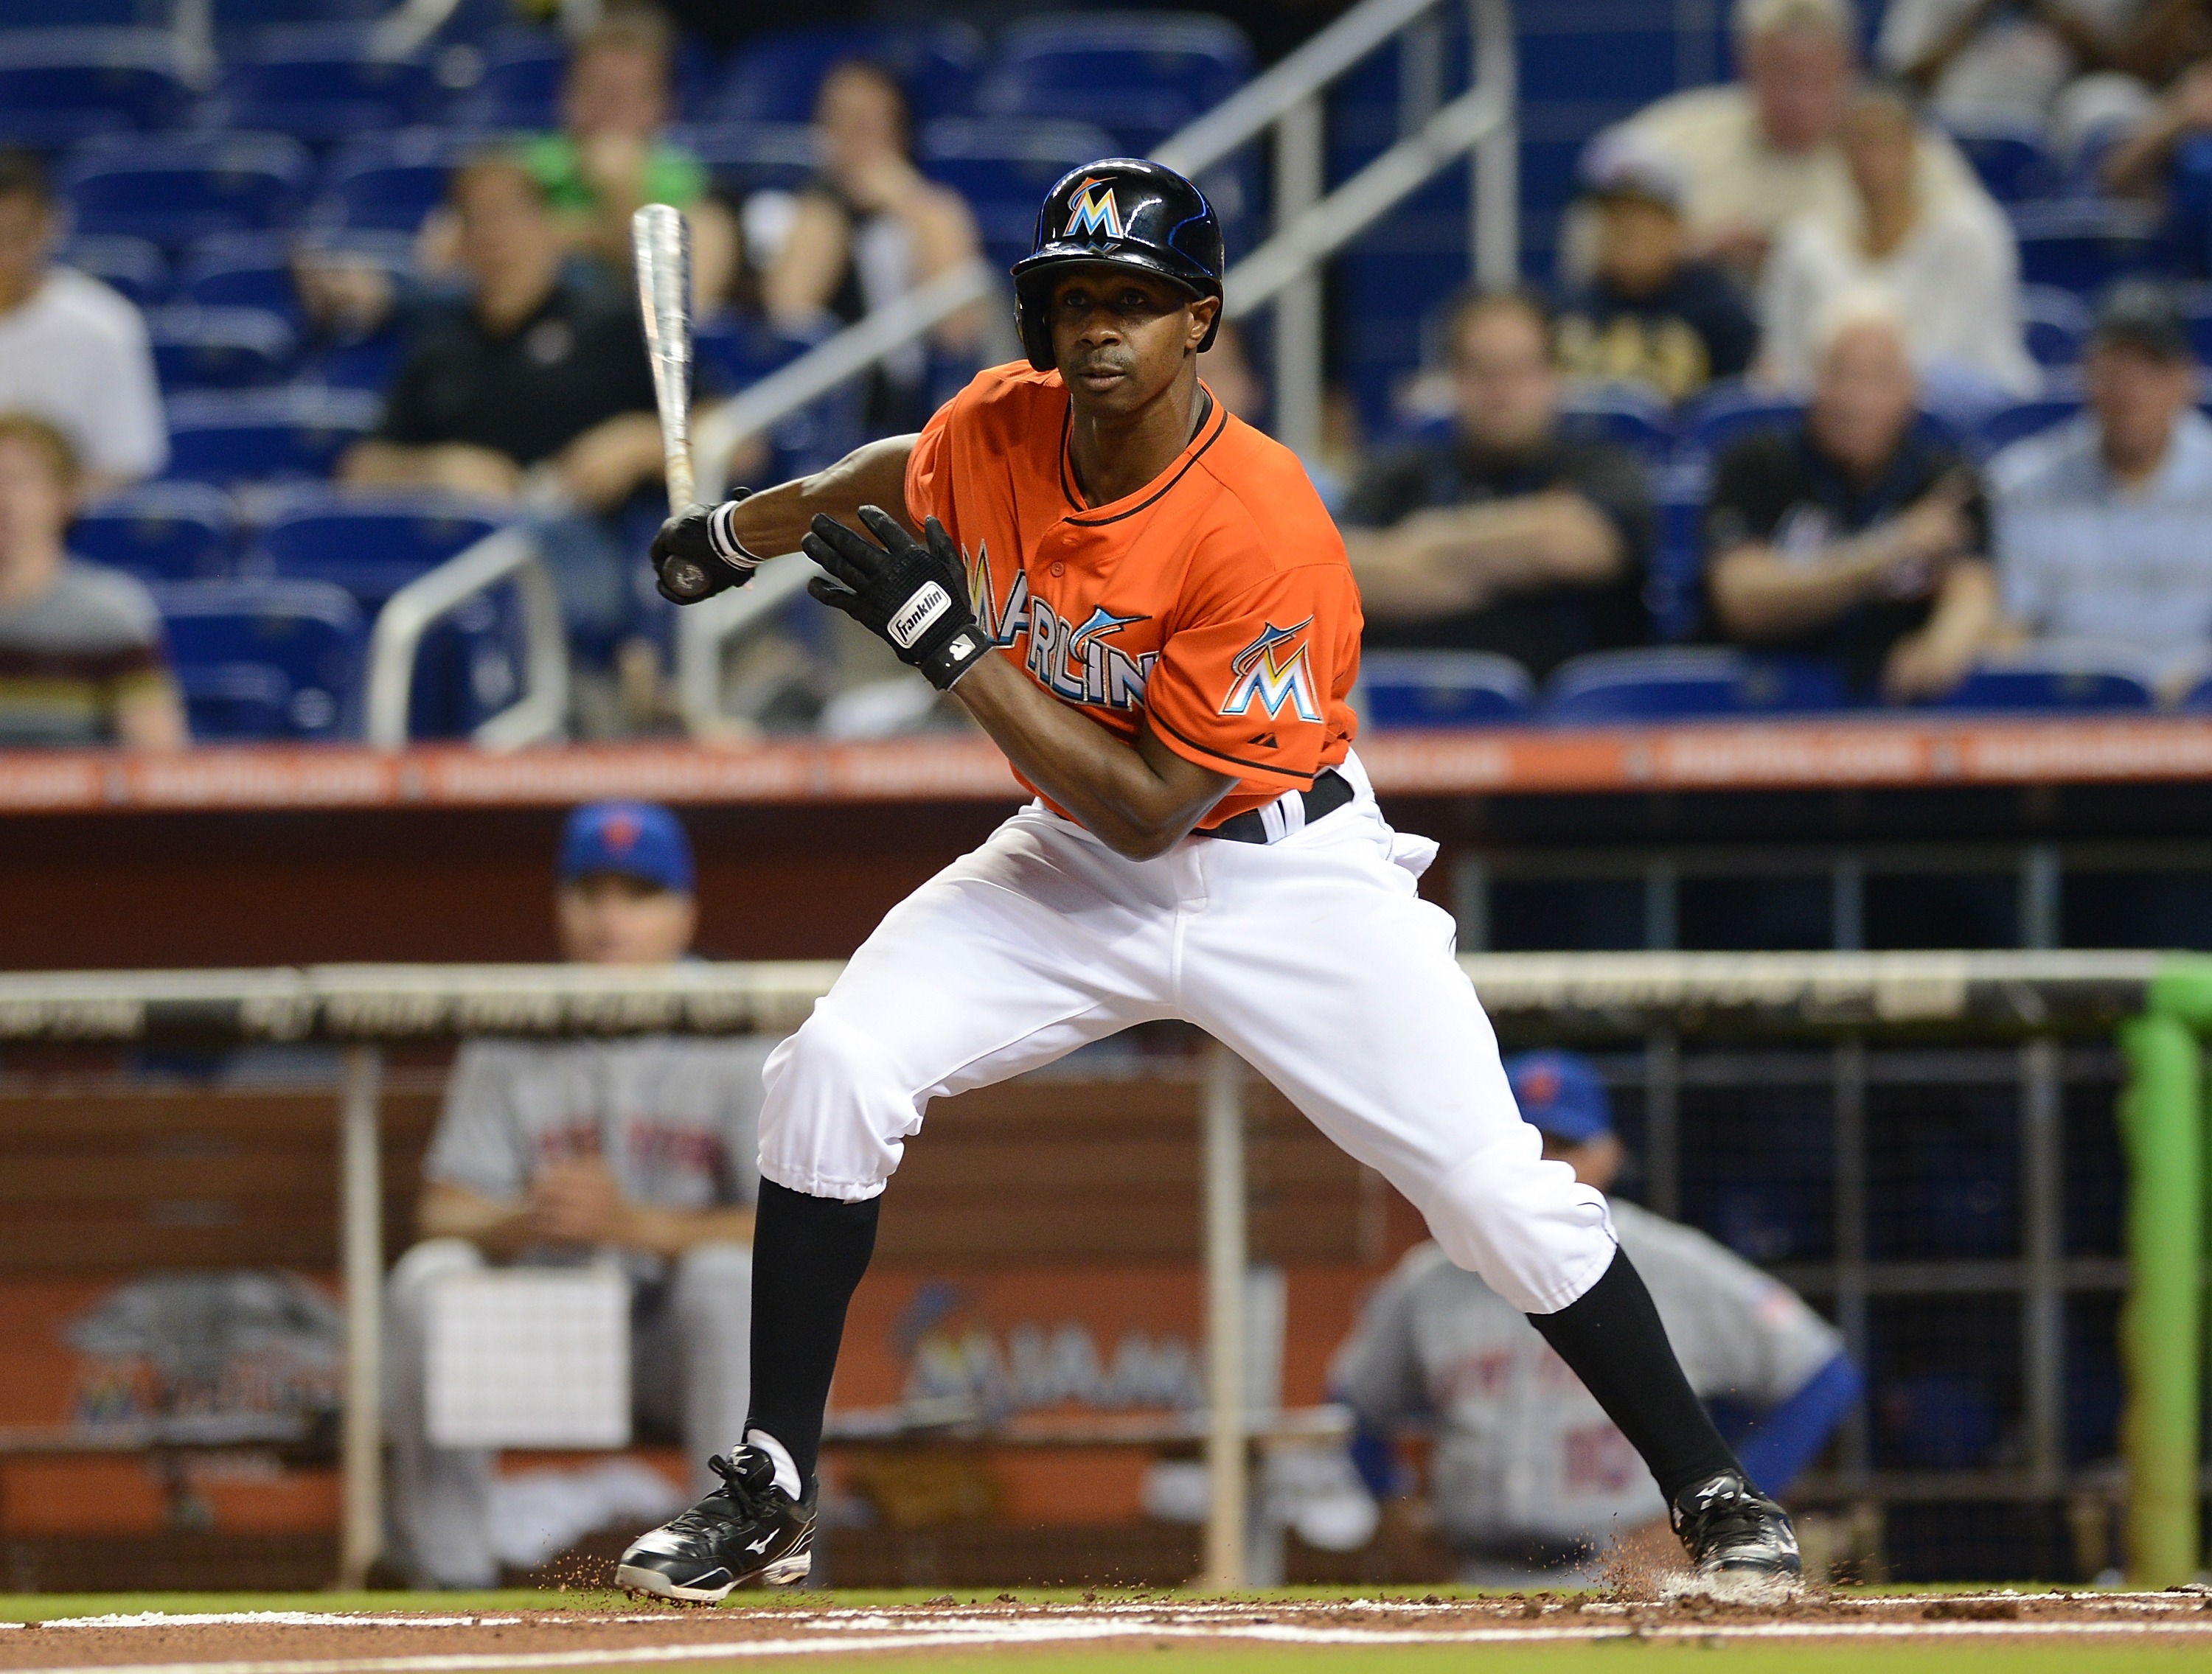 Juan Pierre #9 of the Miami Marlins hits during a game against the New York Mets at Marlins Park on April 30, 2013 in Miami, Florida.